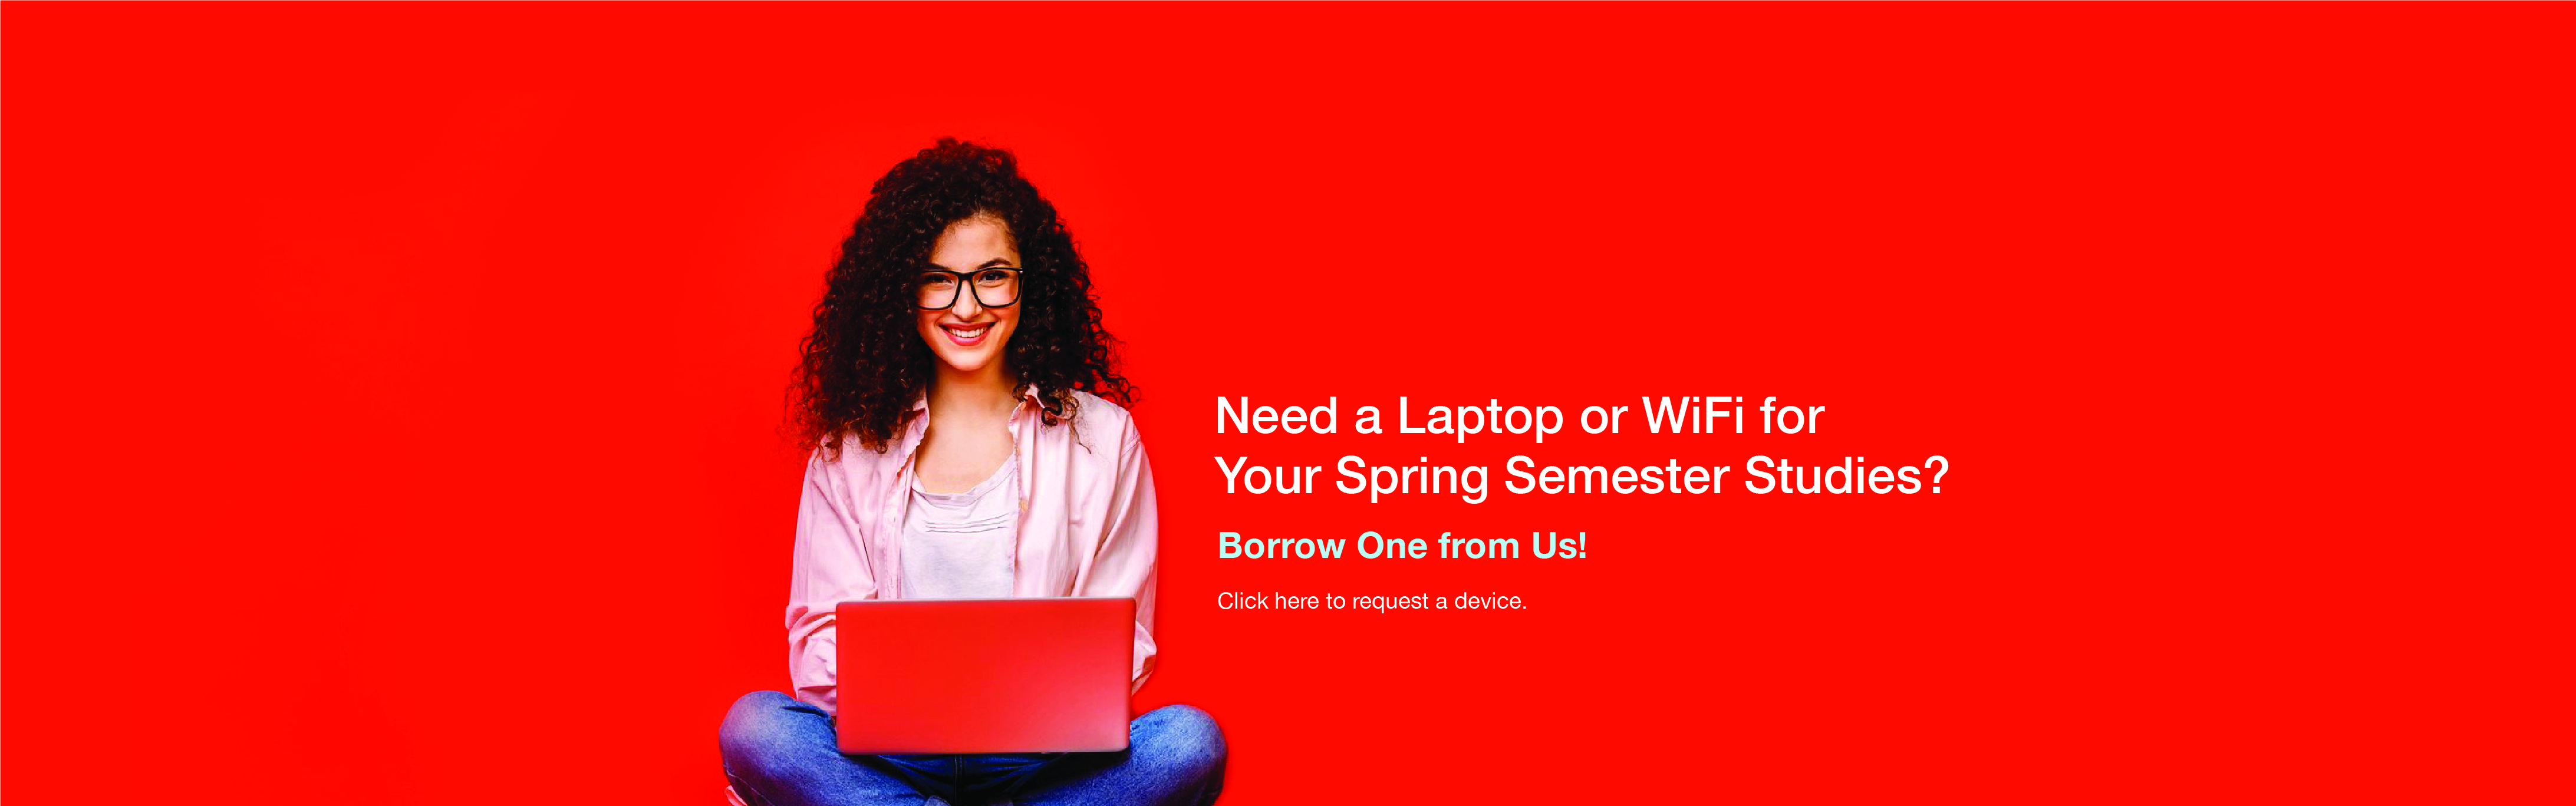 A young woman with brown hair sits crosslegged with an open laptop in her lap against a red background